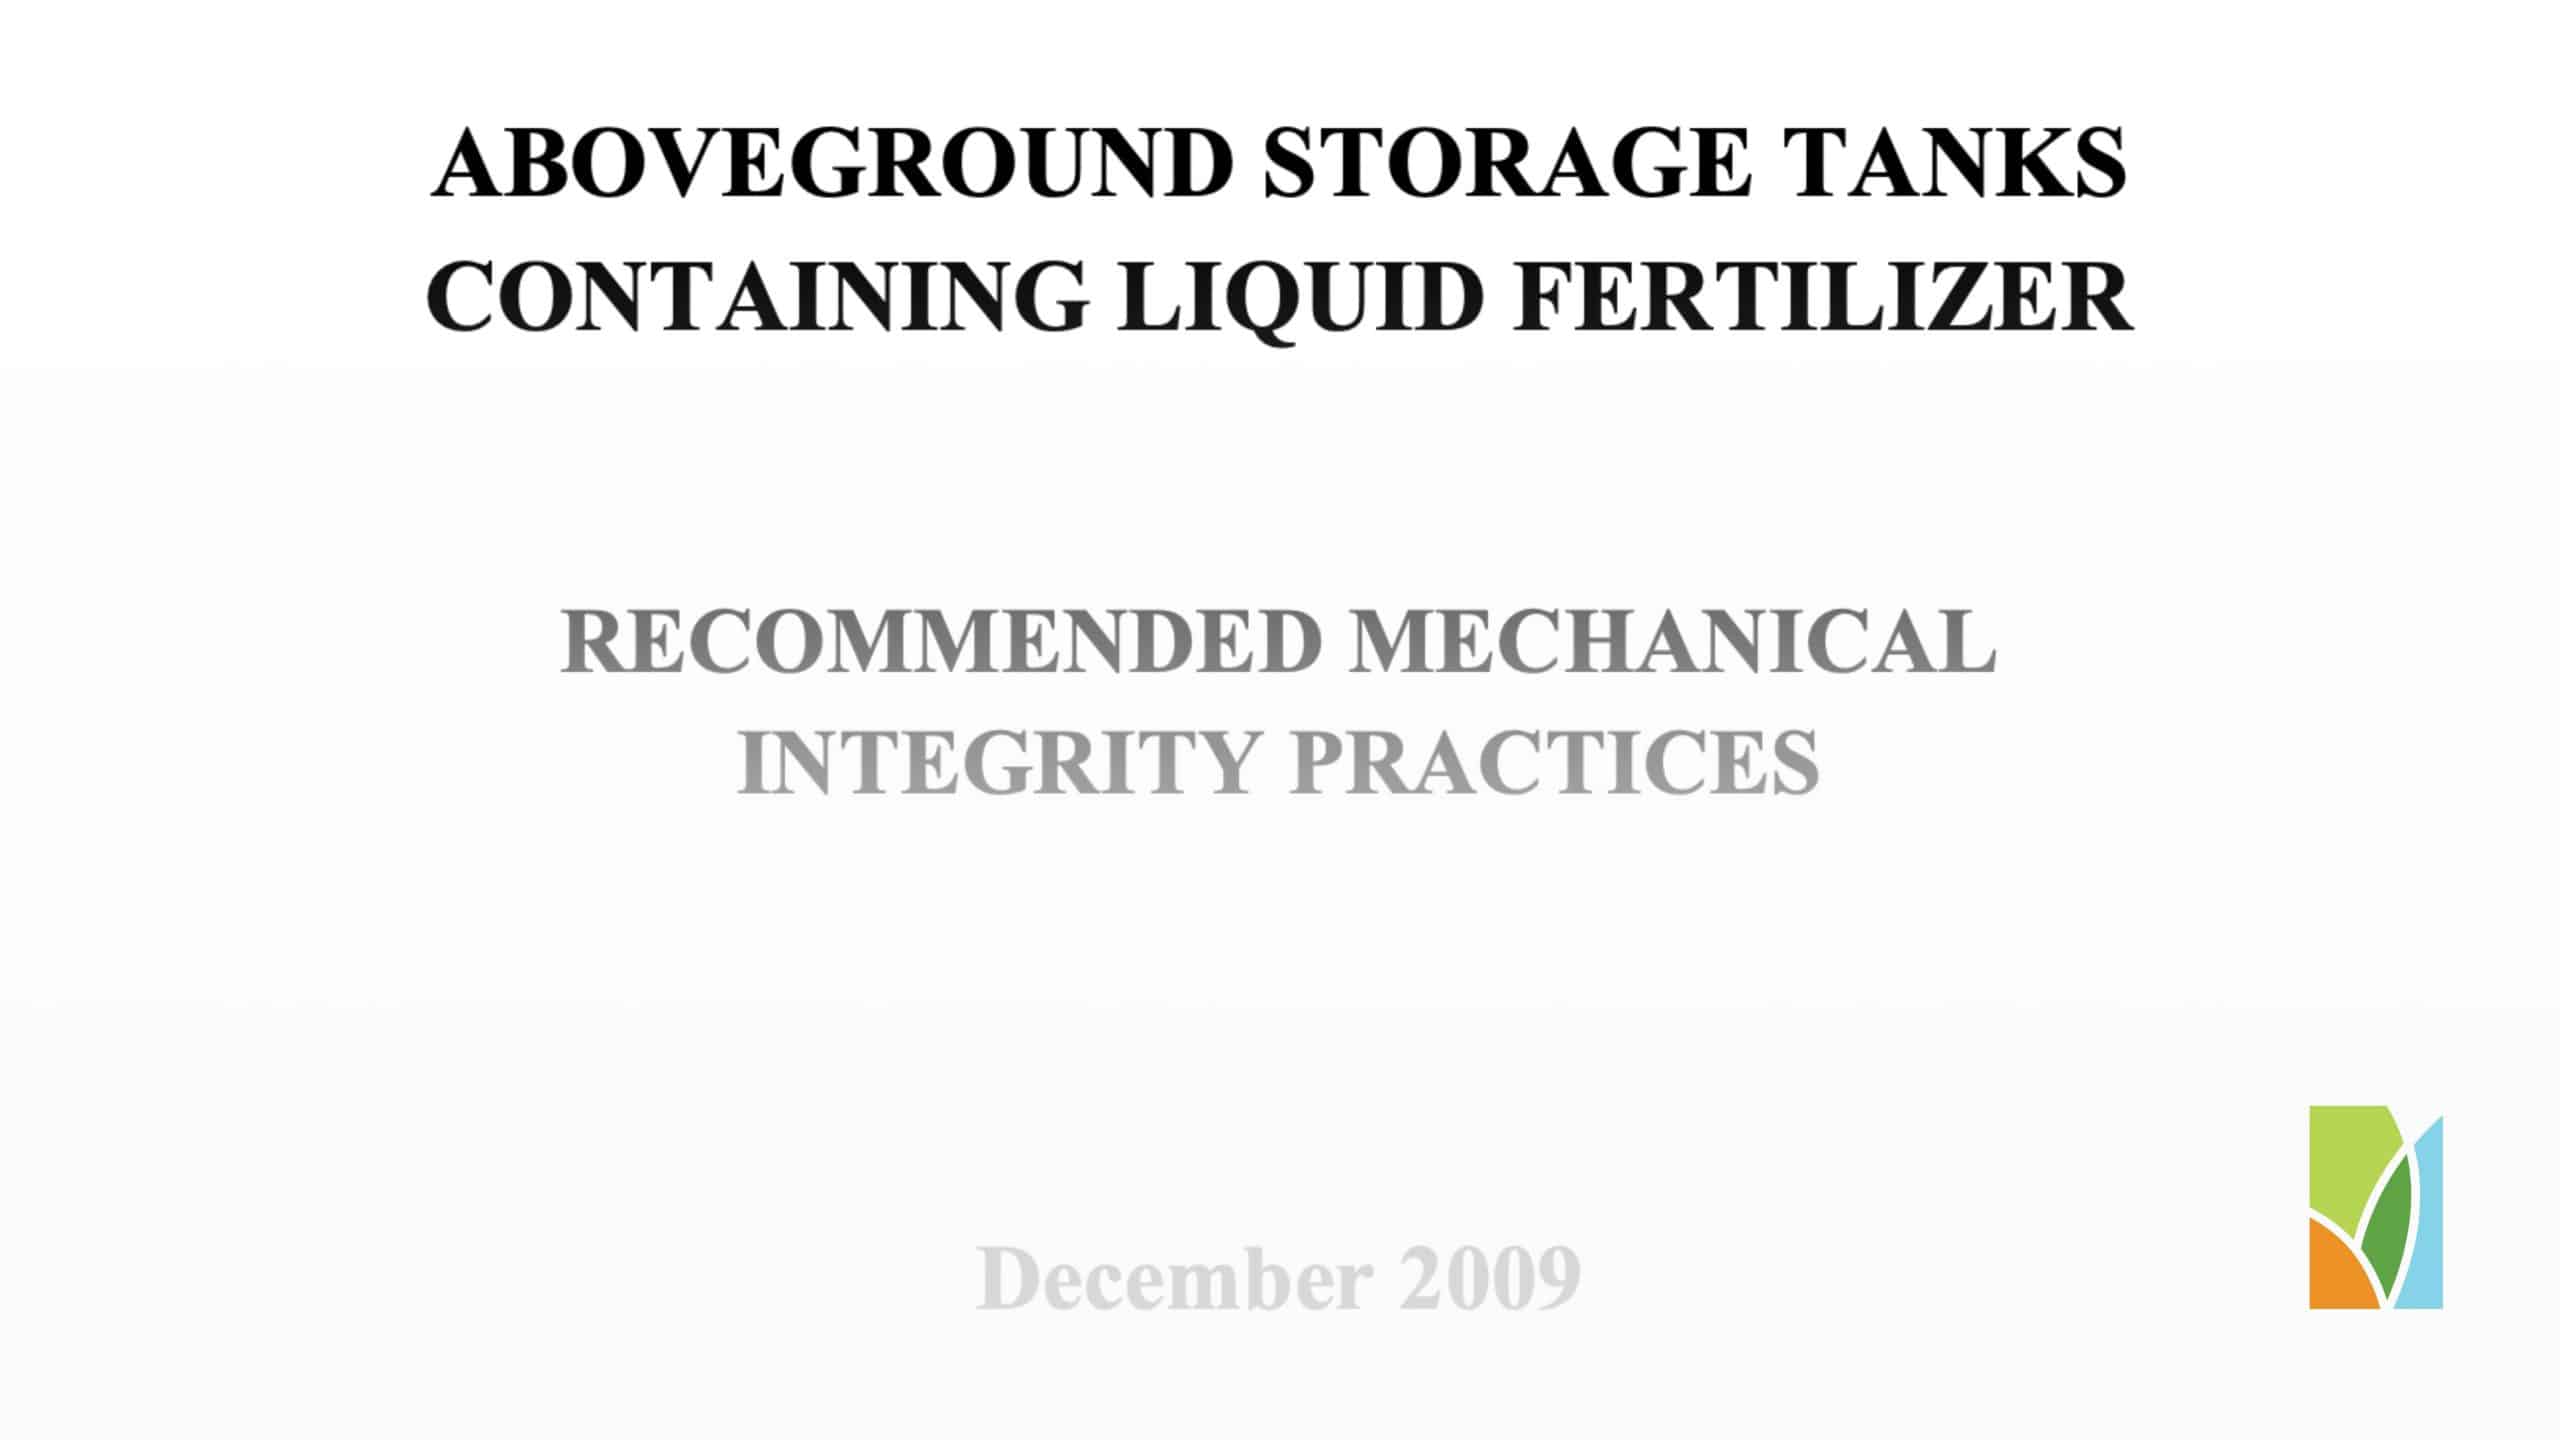 Recommended Mechanical Integrity Practices for Aboveground Storage Tanks Containing Liquid Fertilizer